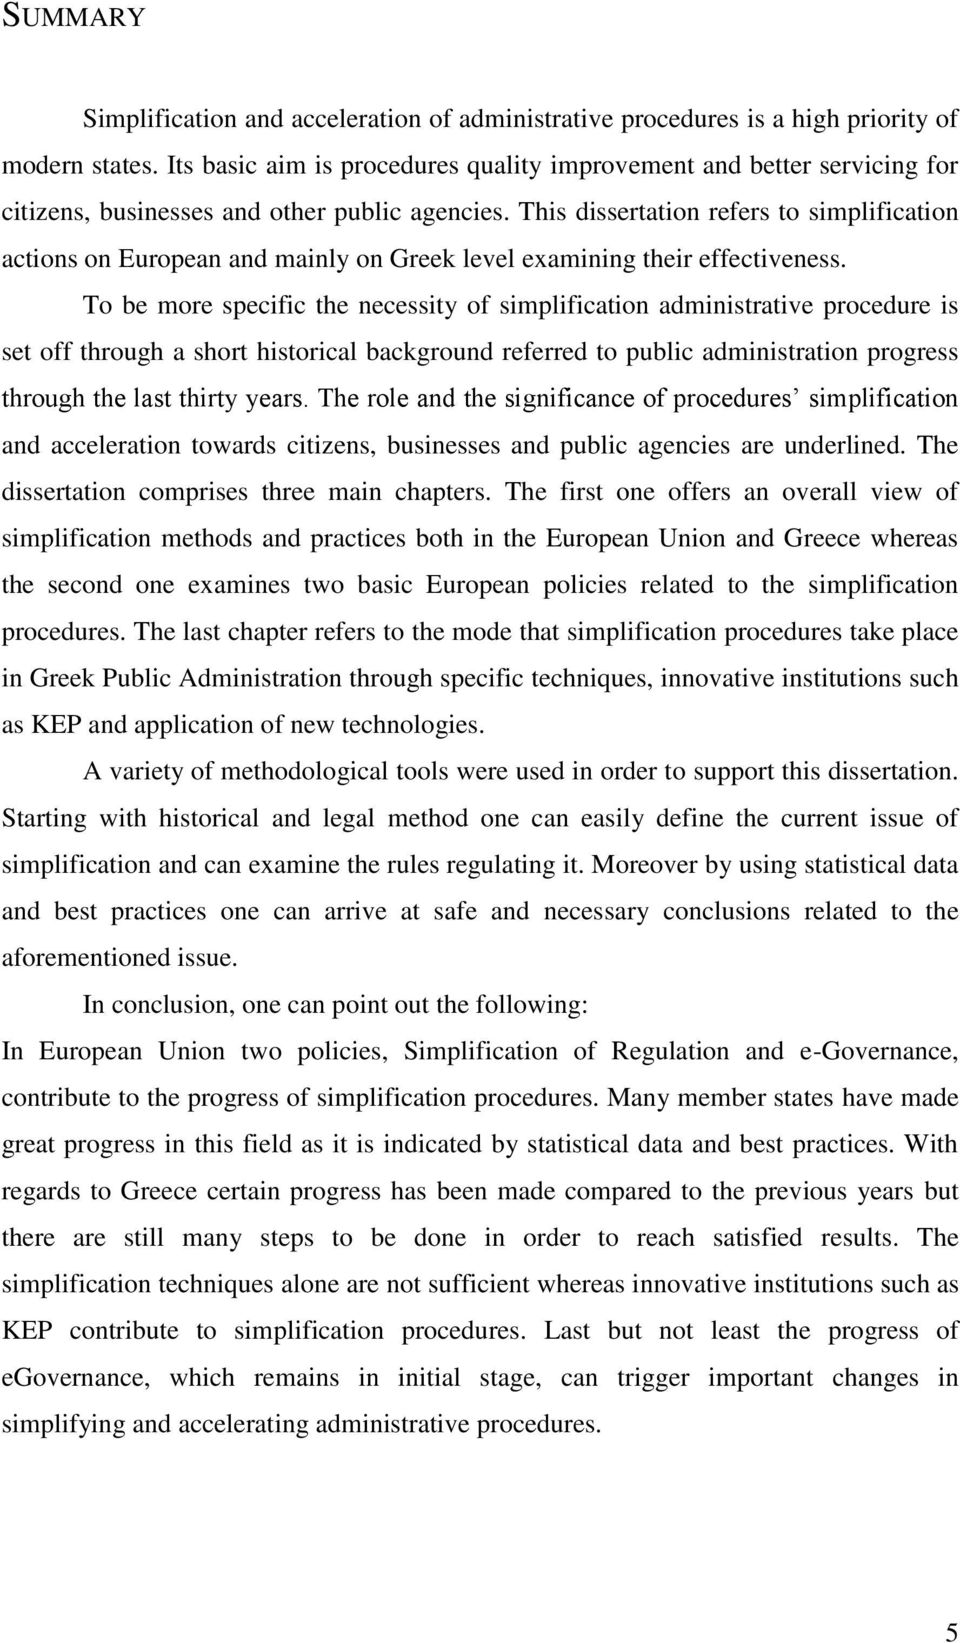 This dissertation refers to simplification actions on European and mainly on Greek level examining their effectiveness.